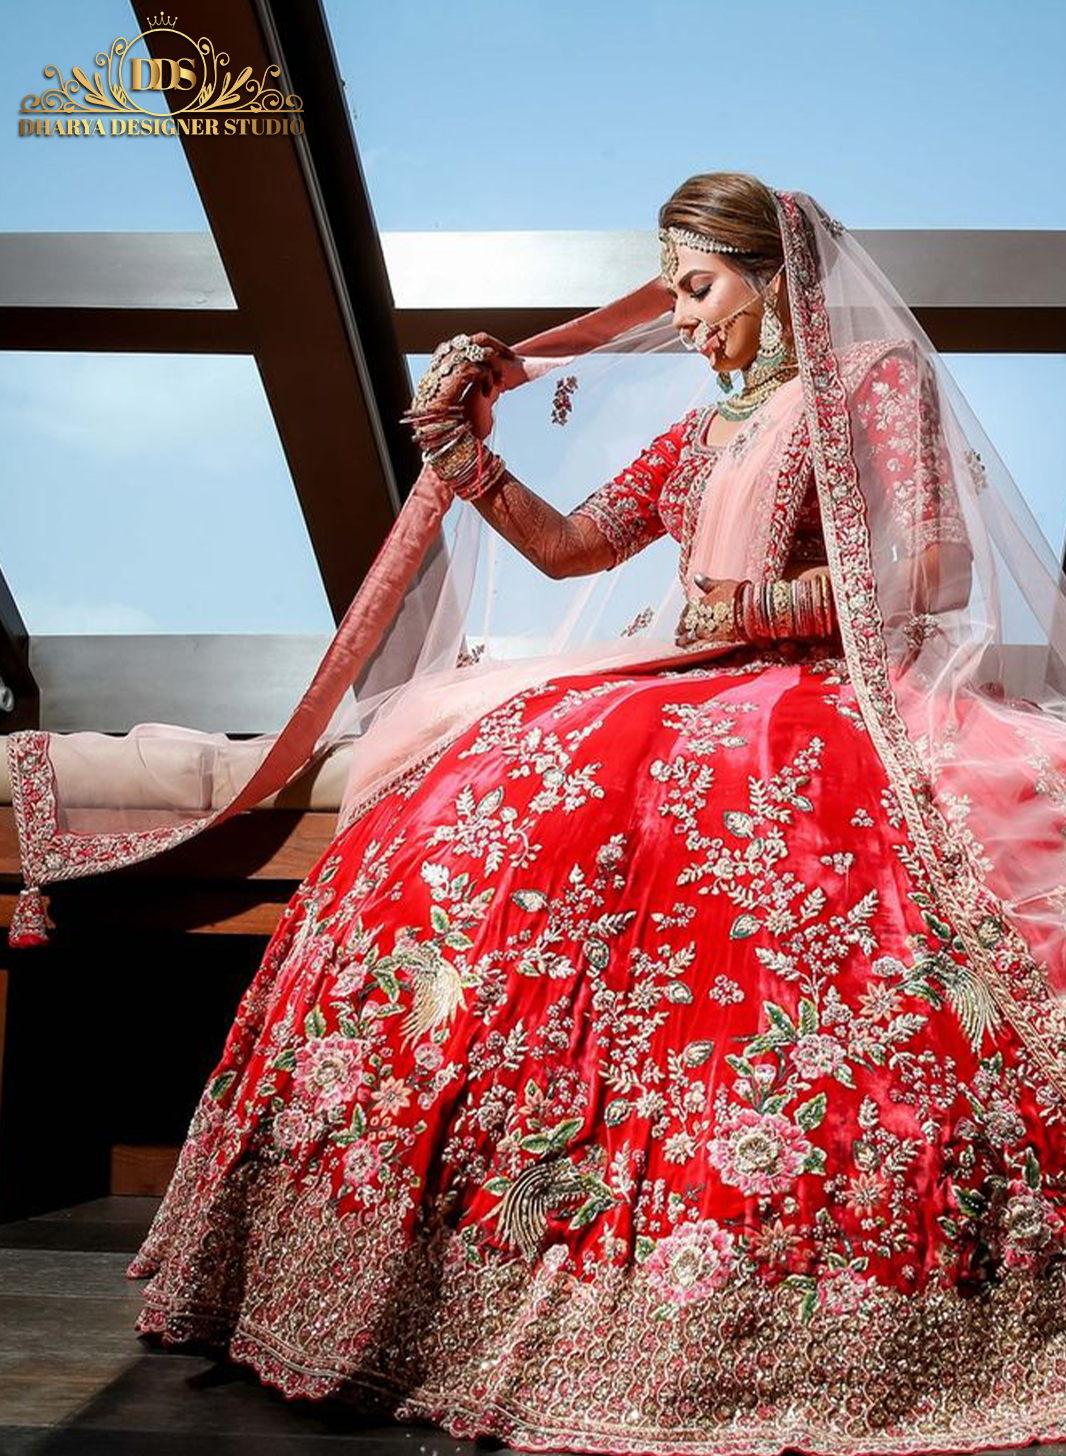 Blush Boutique in Banashankari 3rd Stage,Bangalore - Best Tailors For Women  Wedding Gown in Bangalore - Justdial